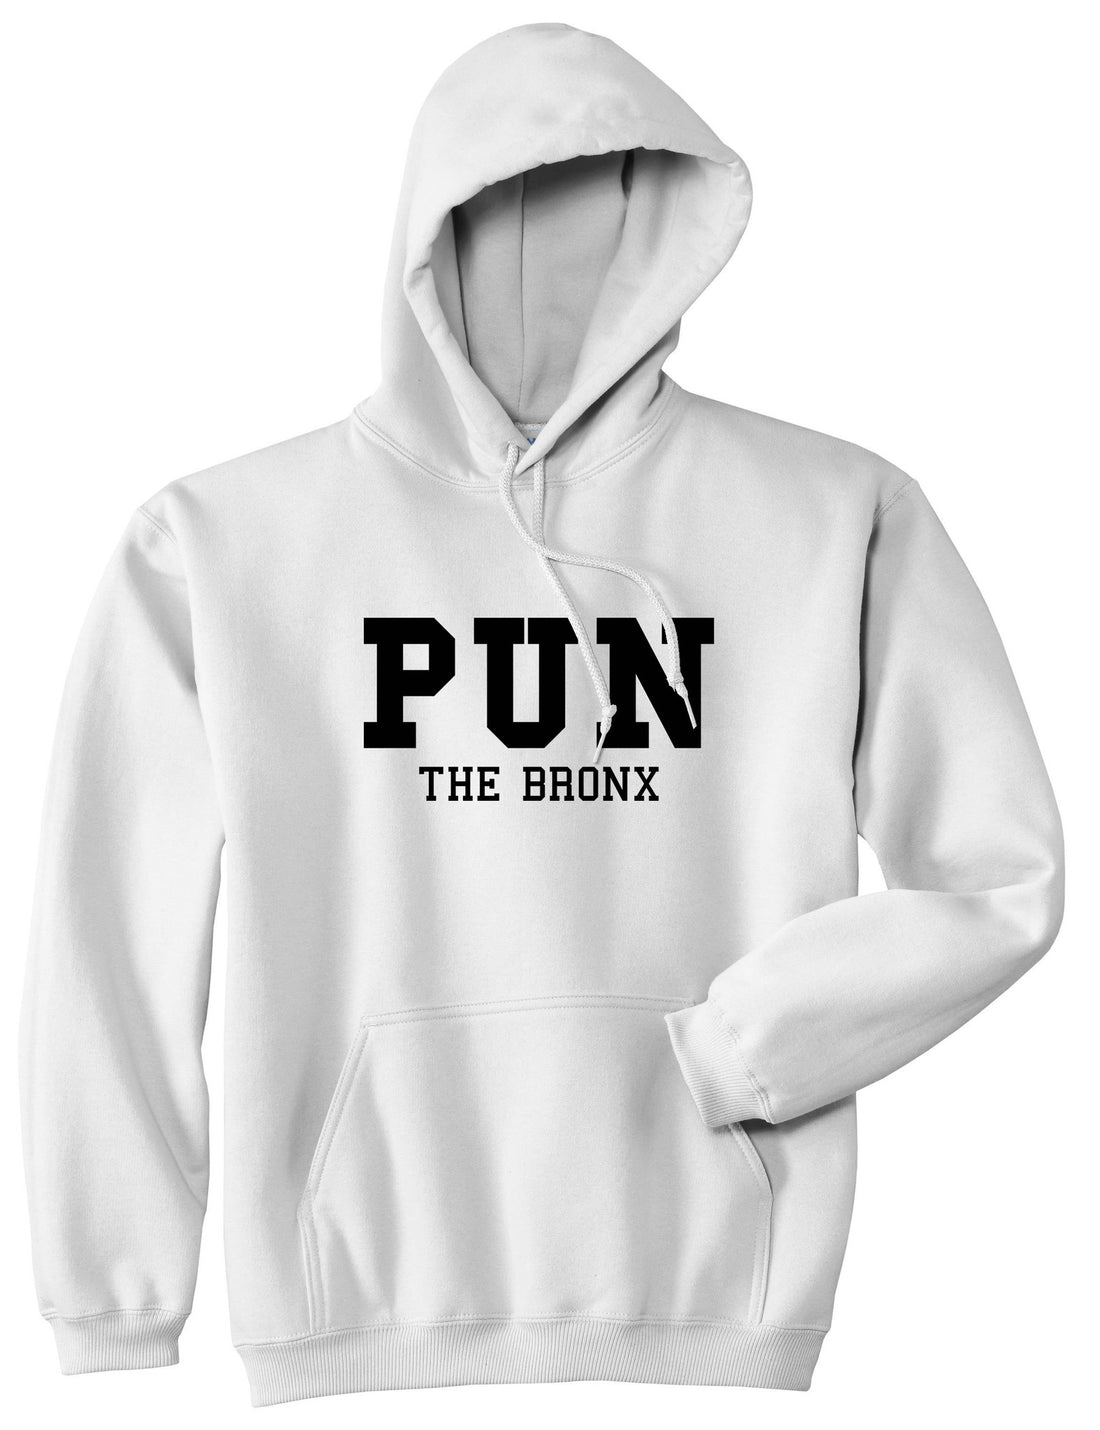 Pun The Bronx Pullover Hoodie Hoody in White by Kings Of NY